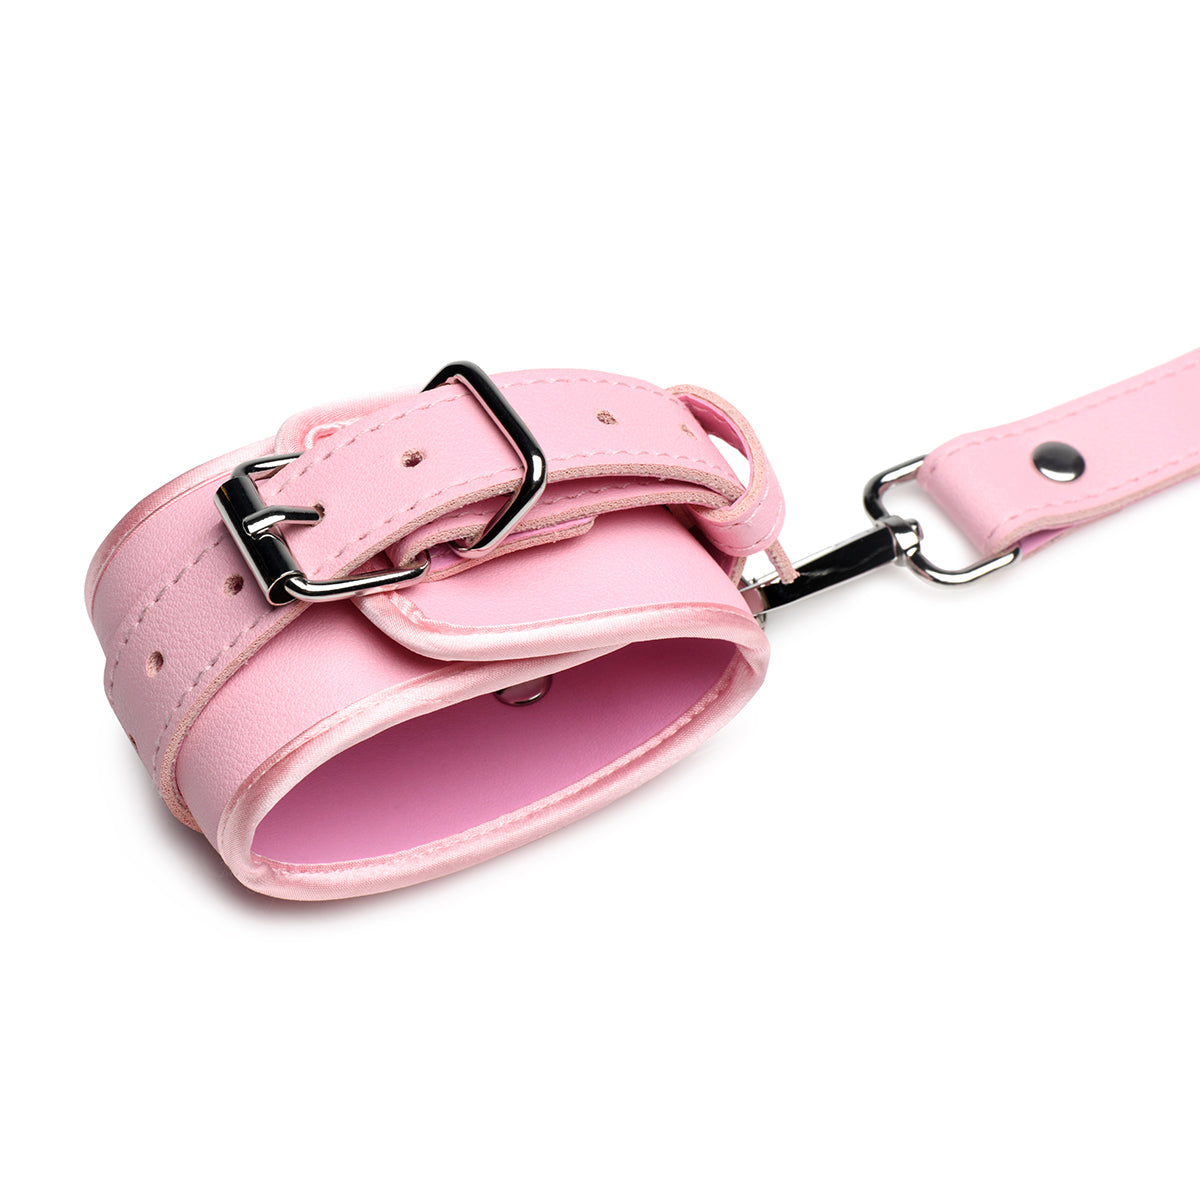 Bondage Harness with Bows M/L - Pink